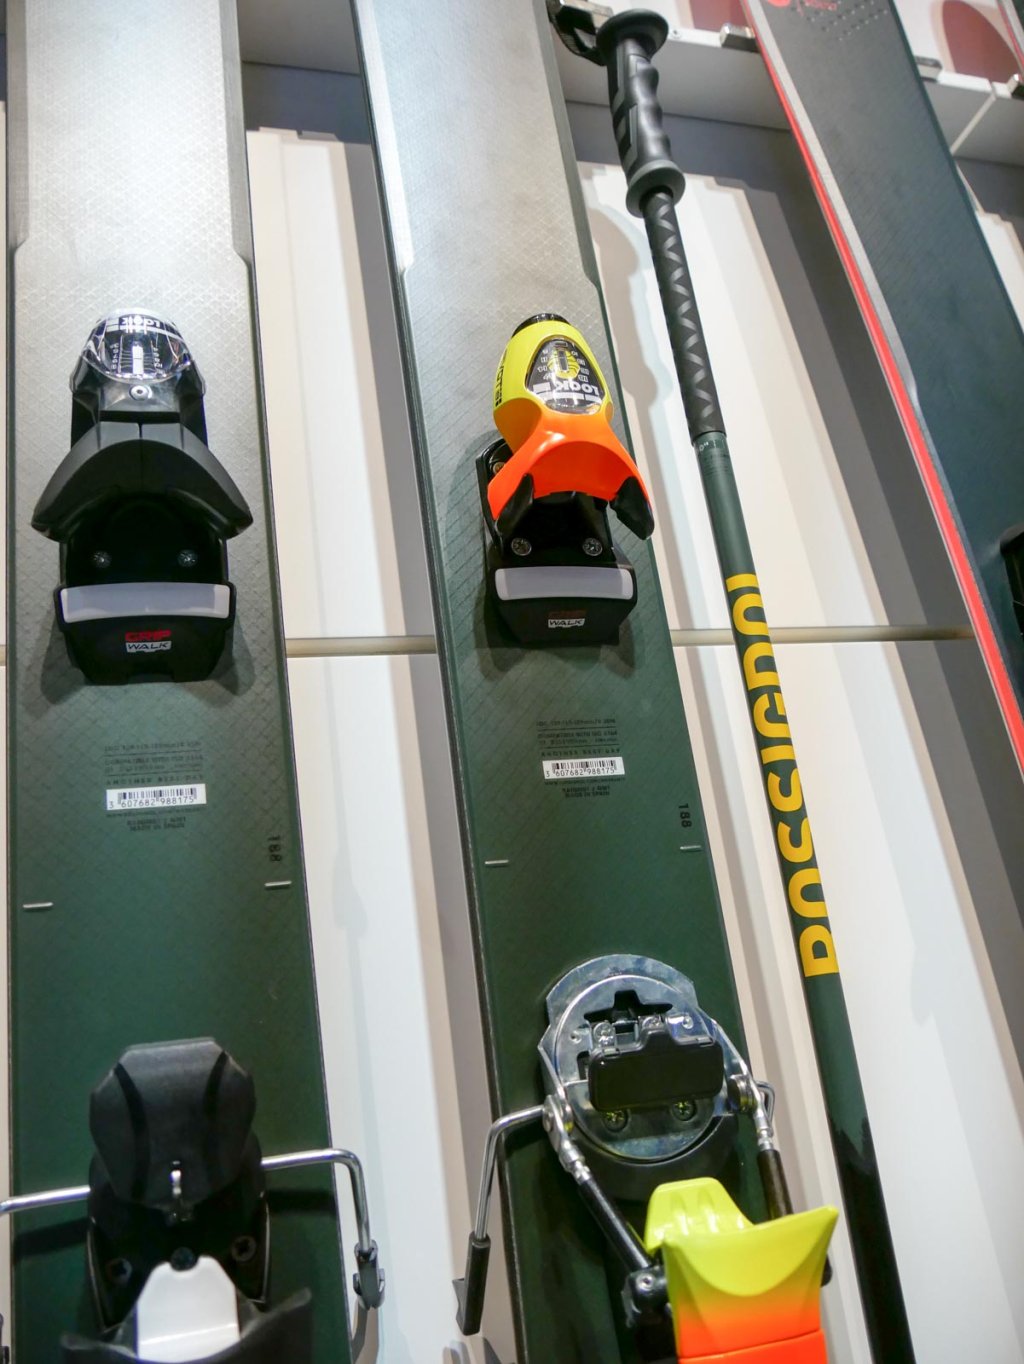 Rossignol skis with the new Gripwalk P18 (see article on bindings)